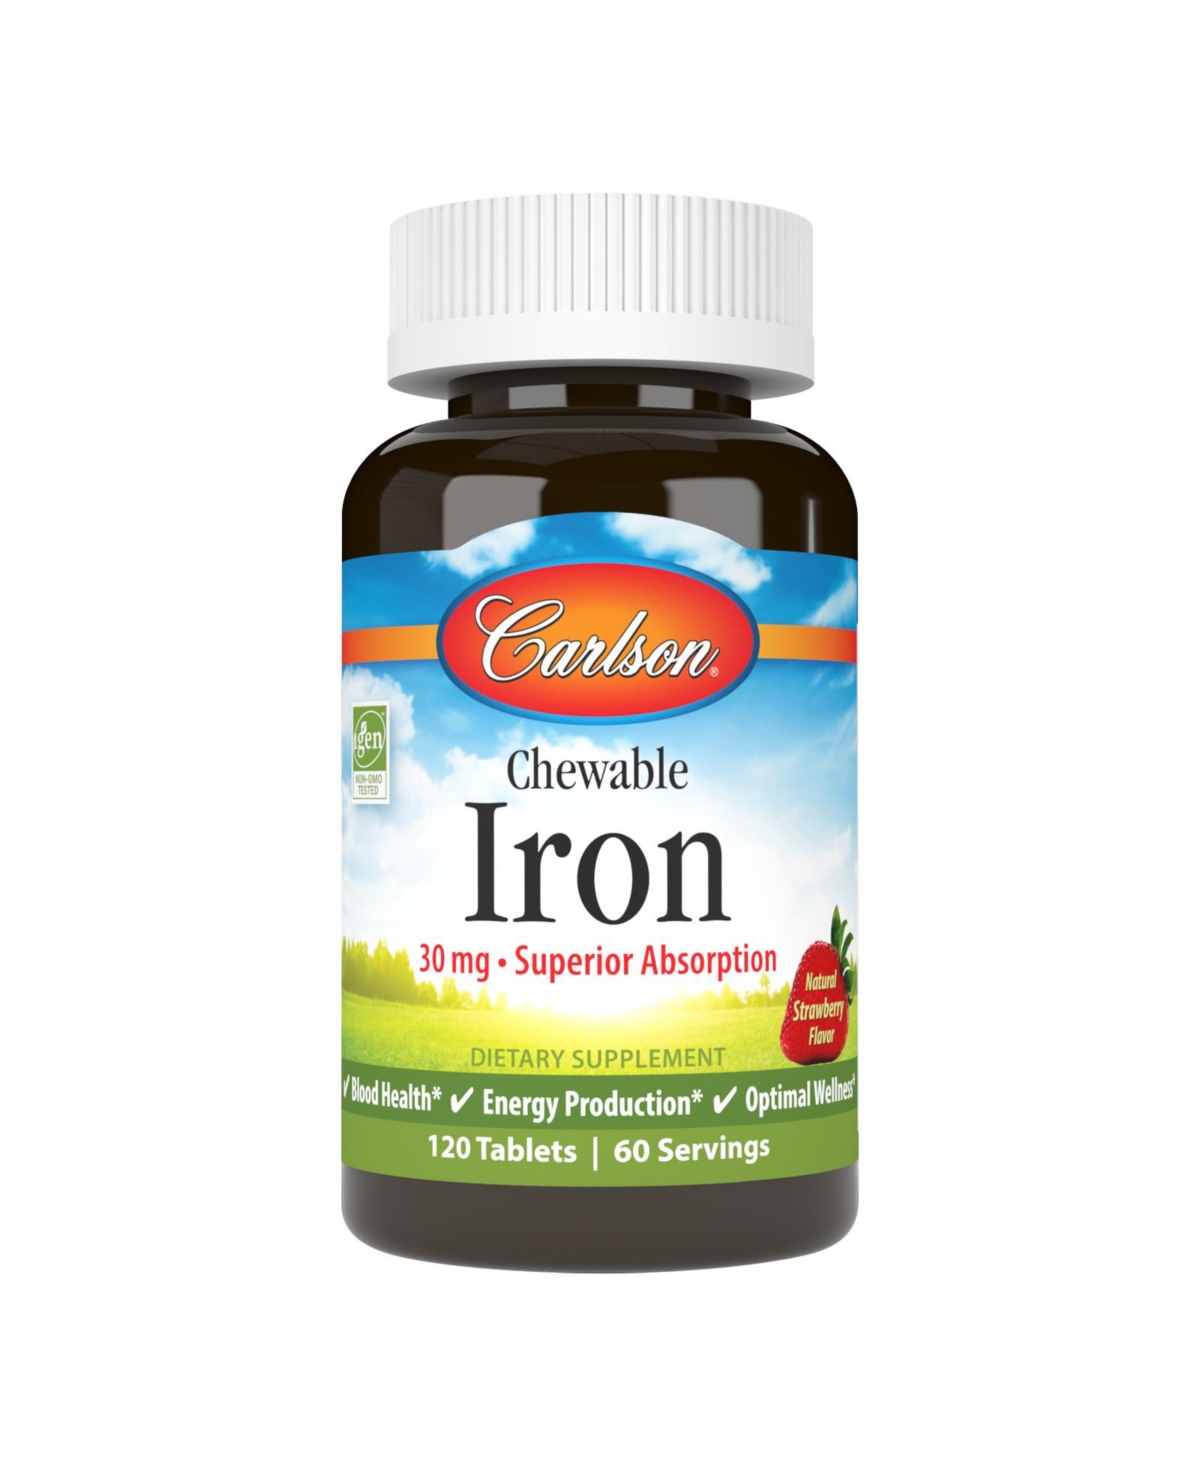 Carlson - Chewable Iron, 30 mg, Superior Absorption, Blood Health, Natural Strawberry Flavor, 120 Tablets - Assorted Pre-Pack